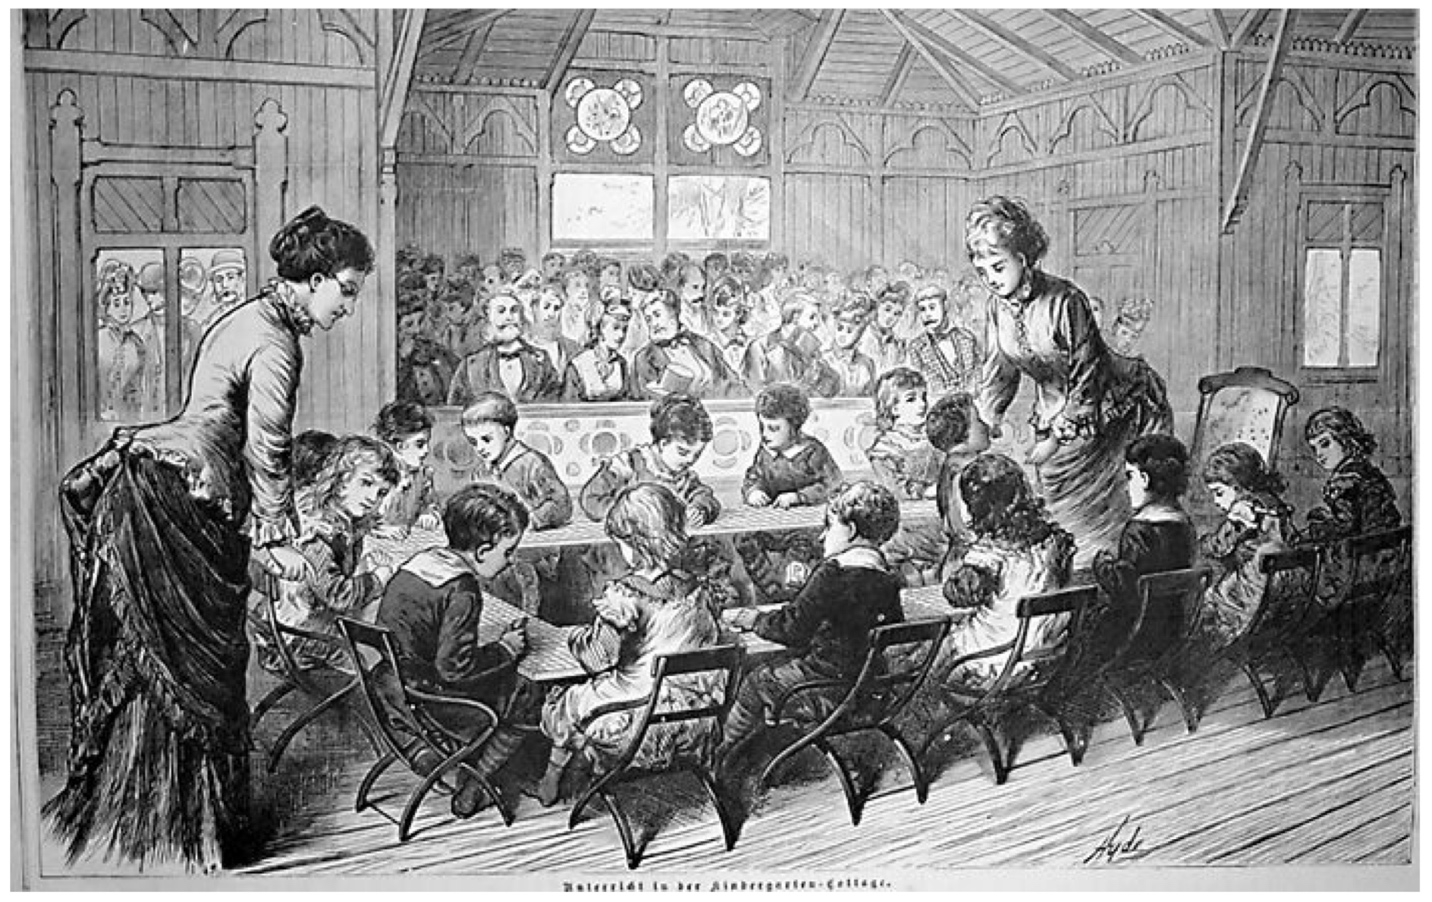 A group of children sitting in a classroom

Description automatically generated